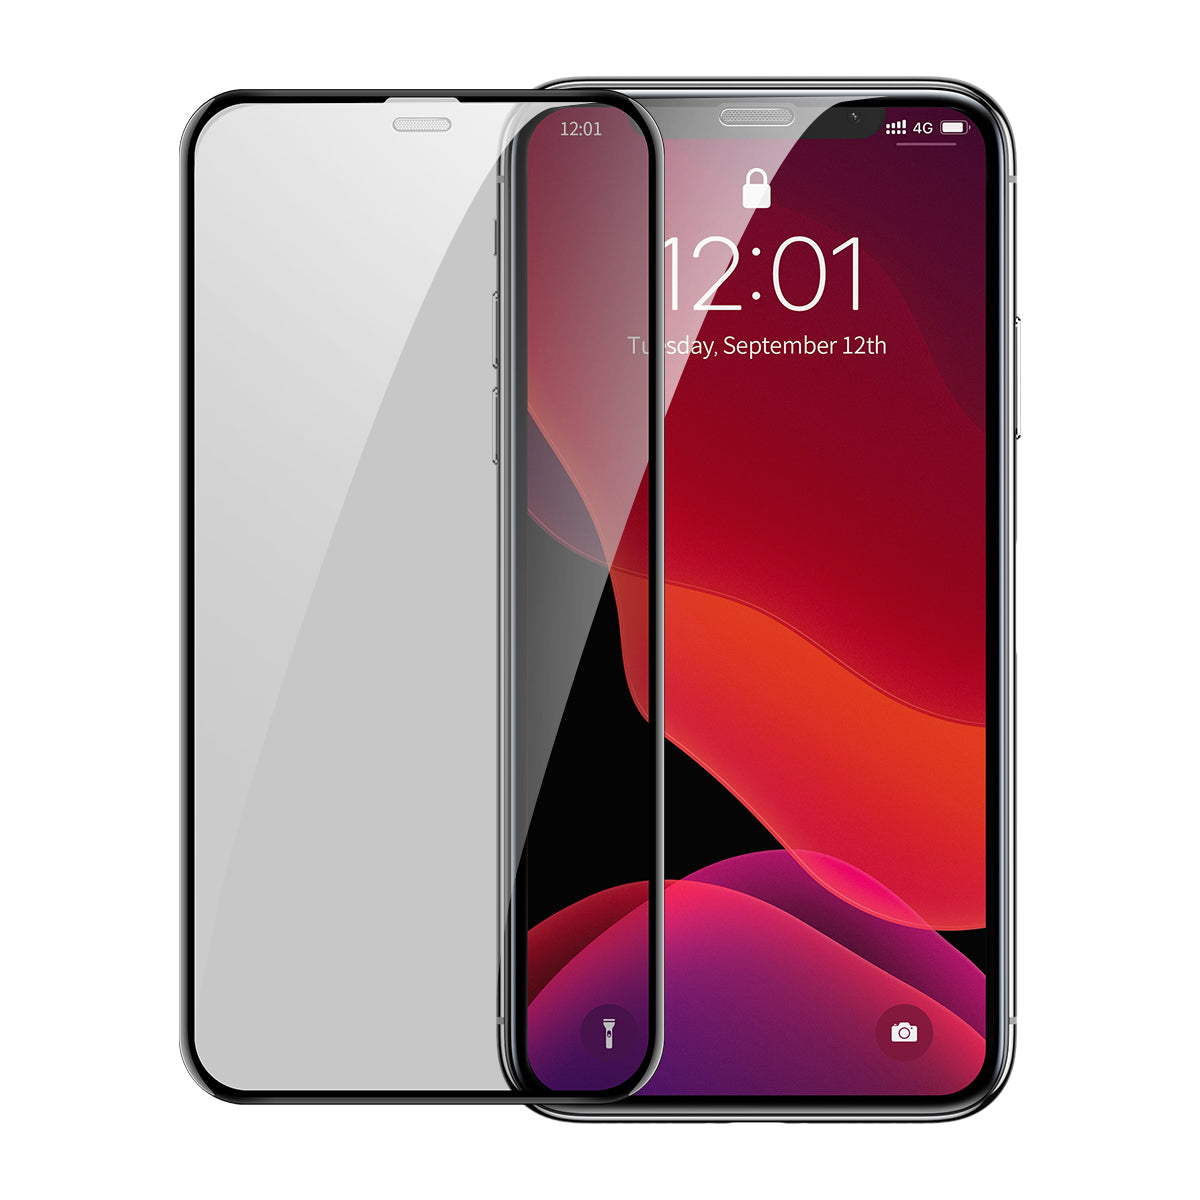 BASEUS Full-screen Curved Privacy Tempered Glass Film (Cellular Dust Prevention) (2pcs) for iPhone 11 Pro Max / 11 Pro / 11 / XS Max / XS / X / XR